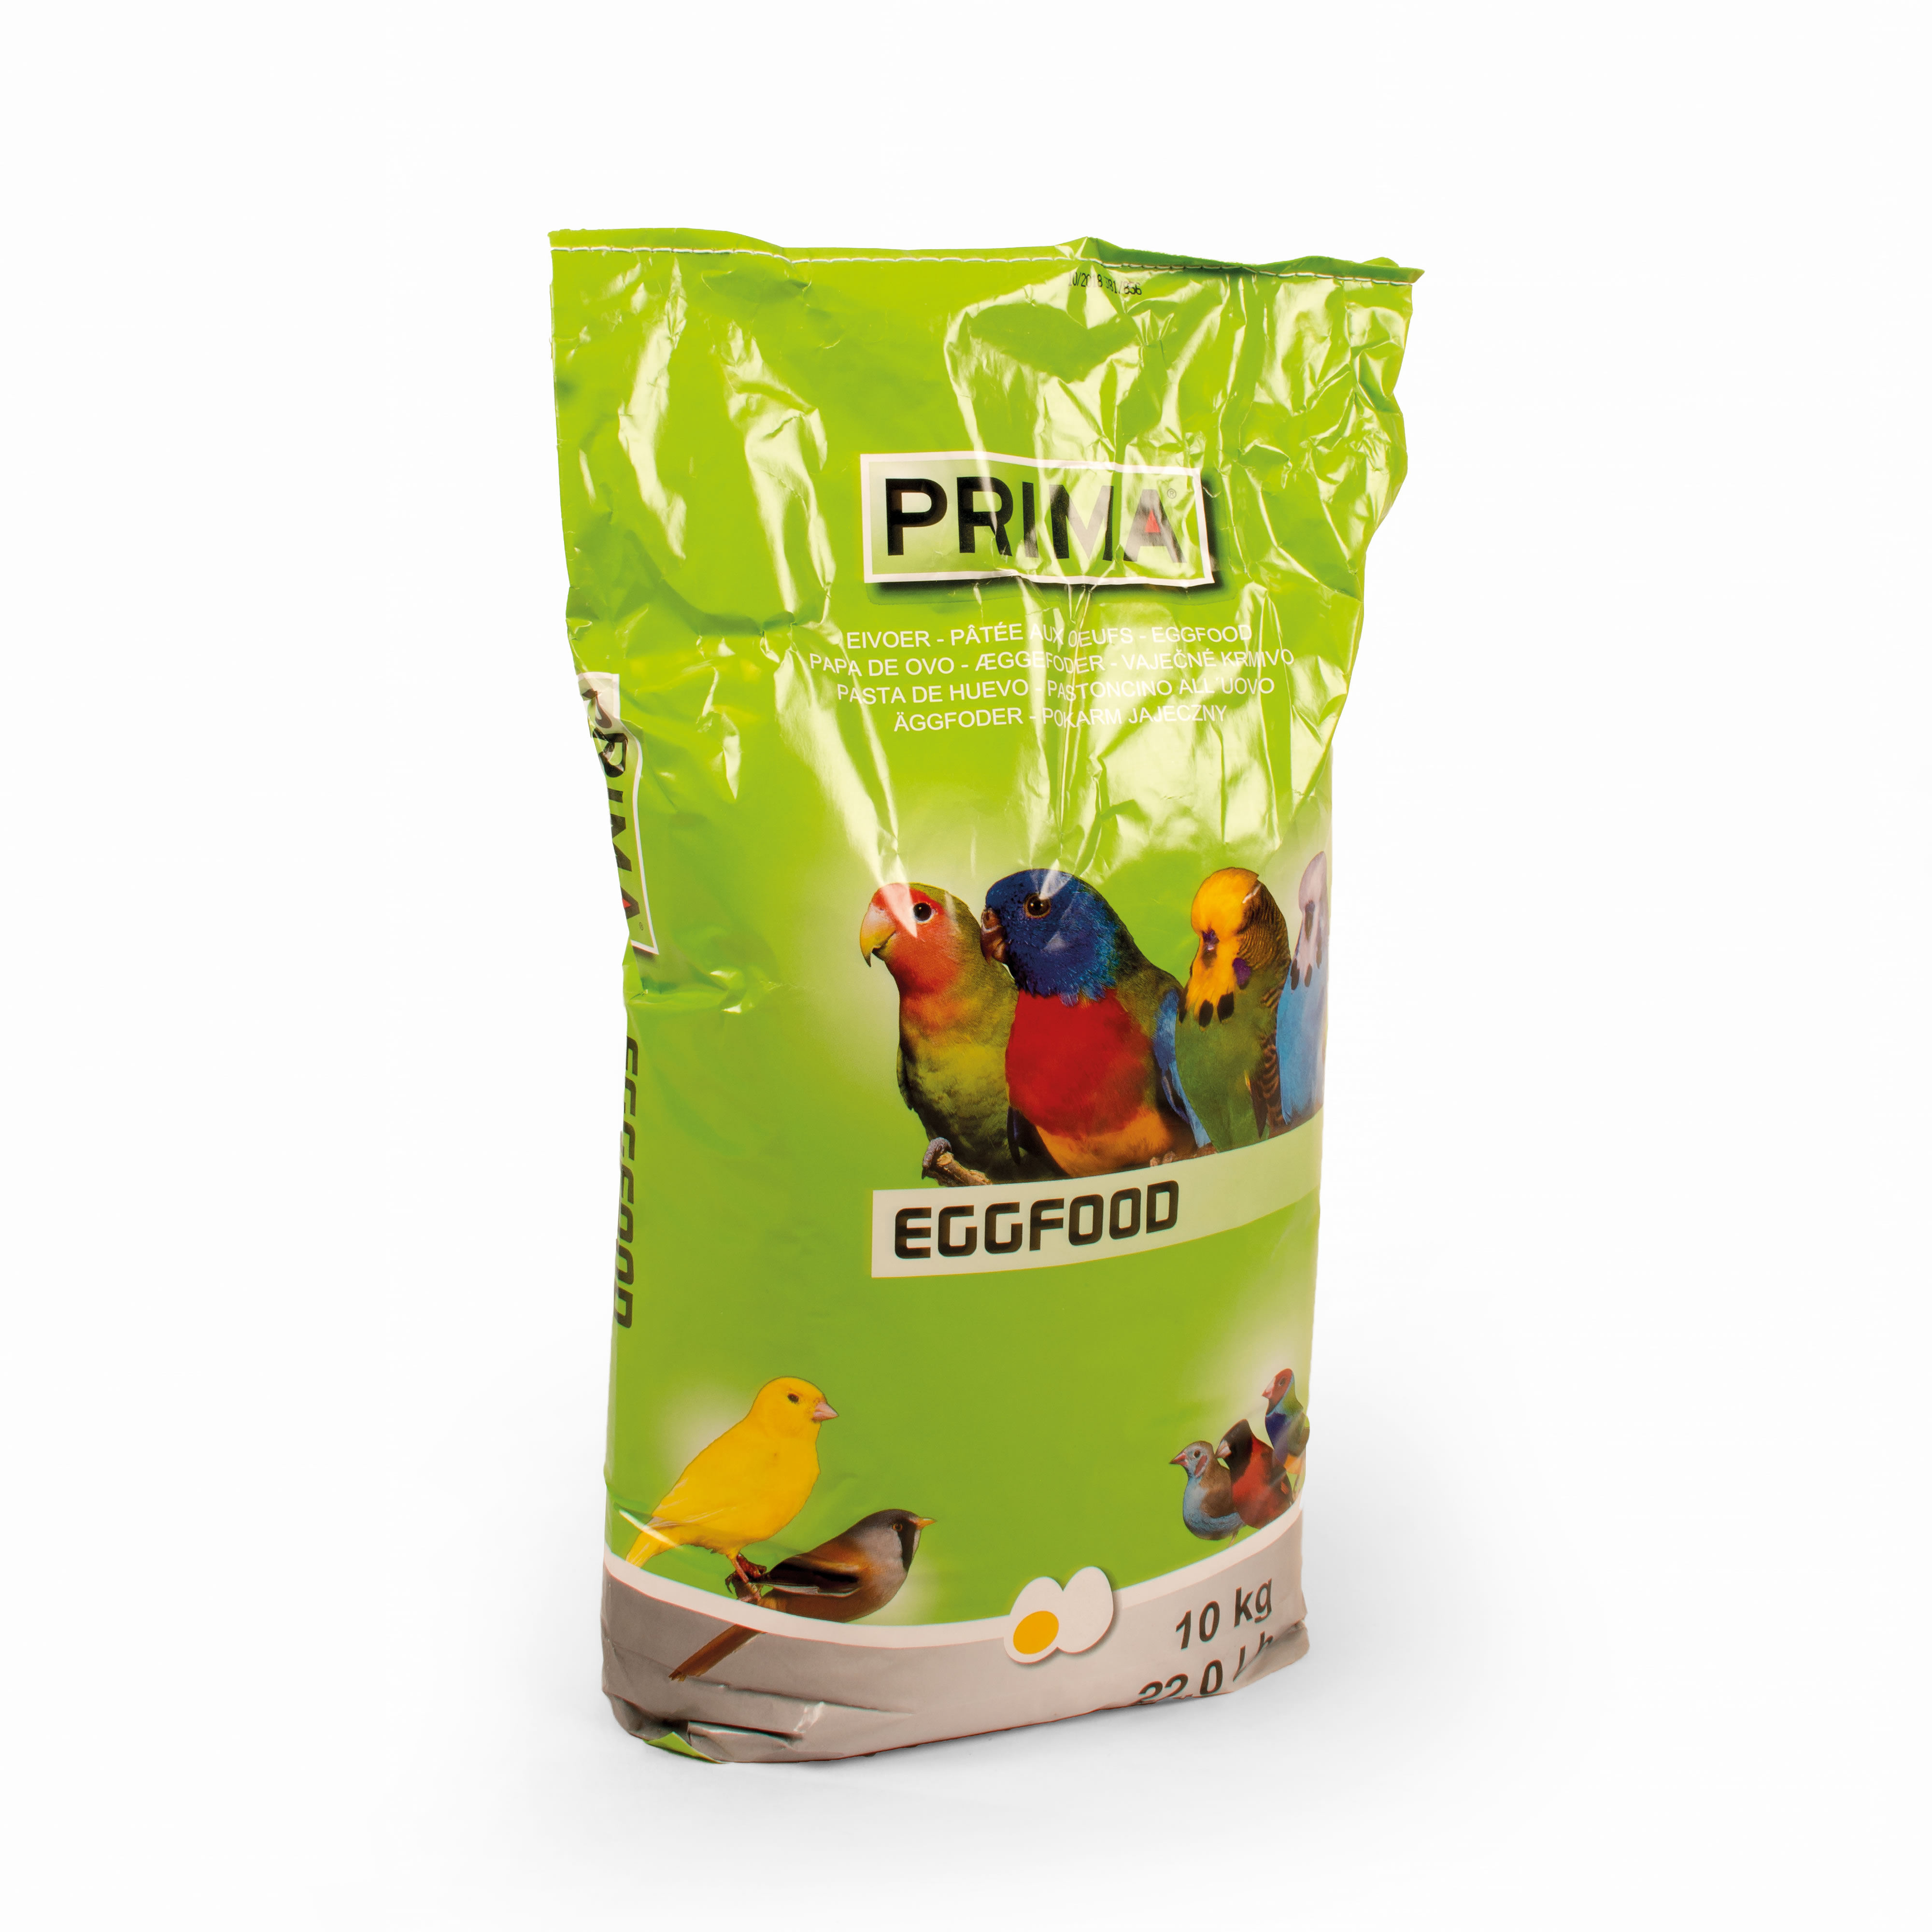 Eggfood canary tropical & british finches - Product shot